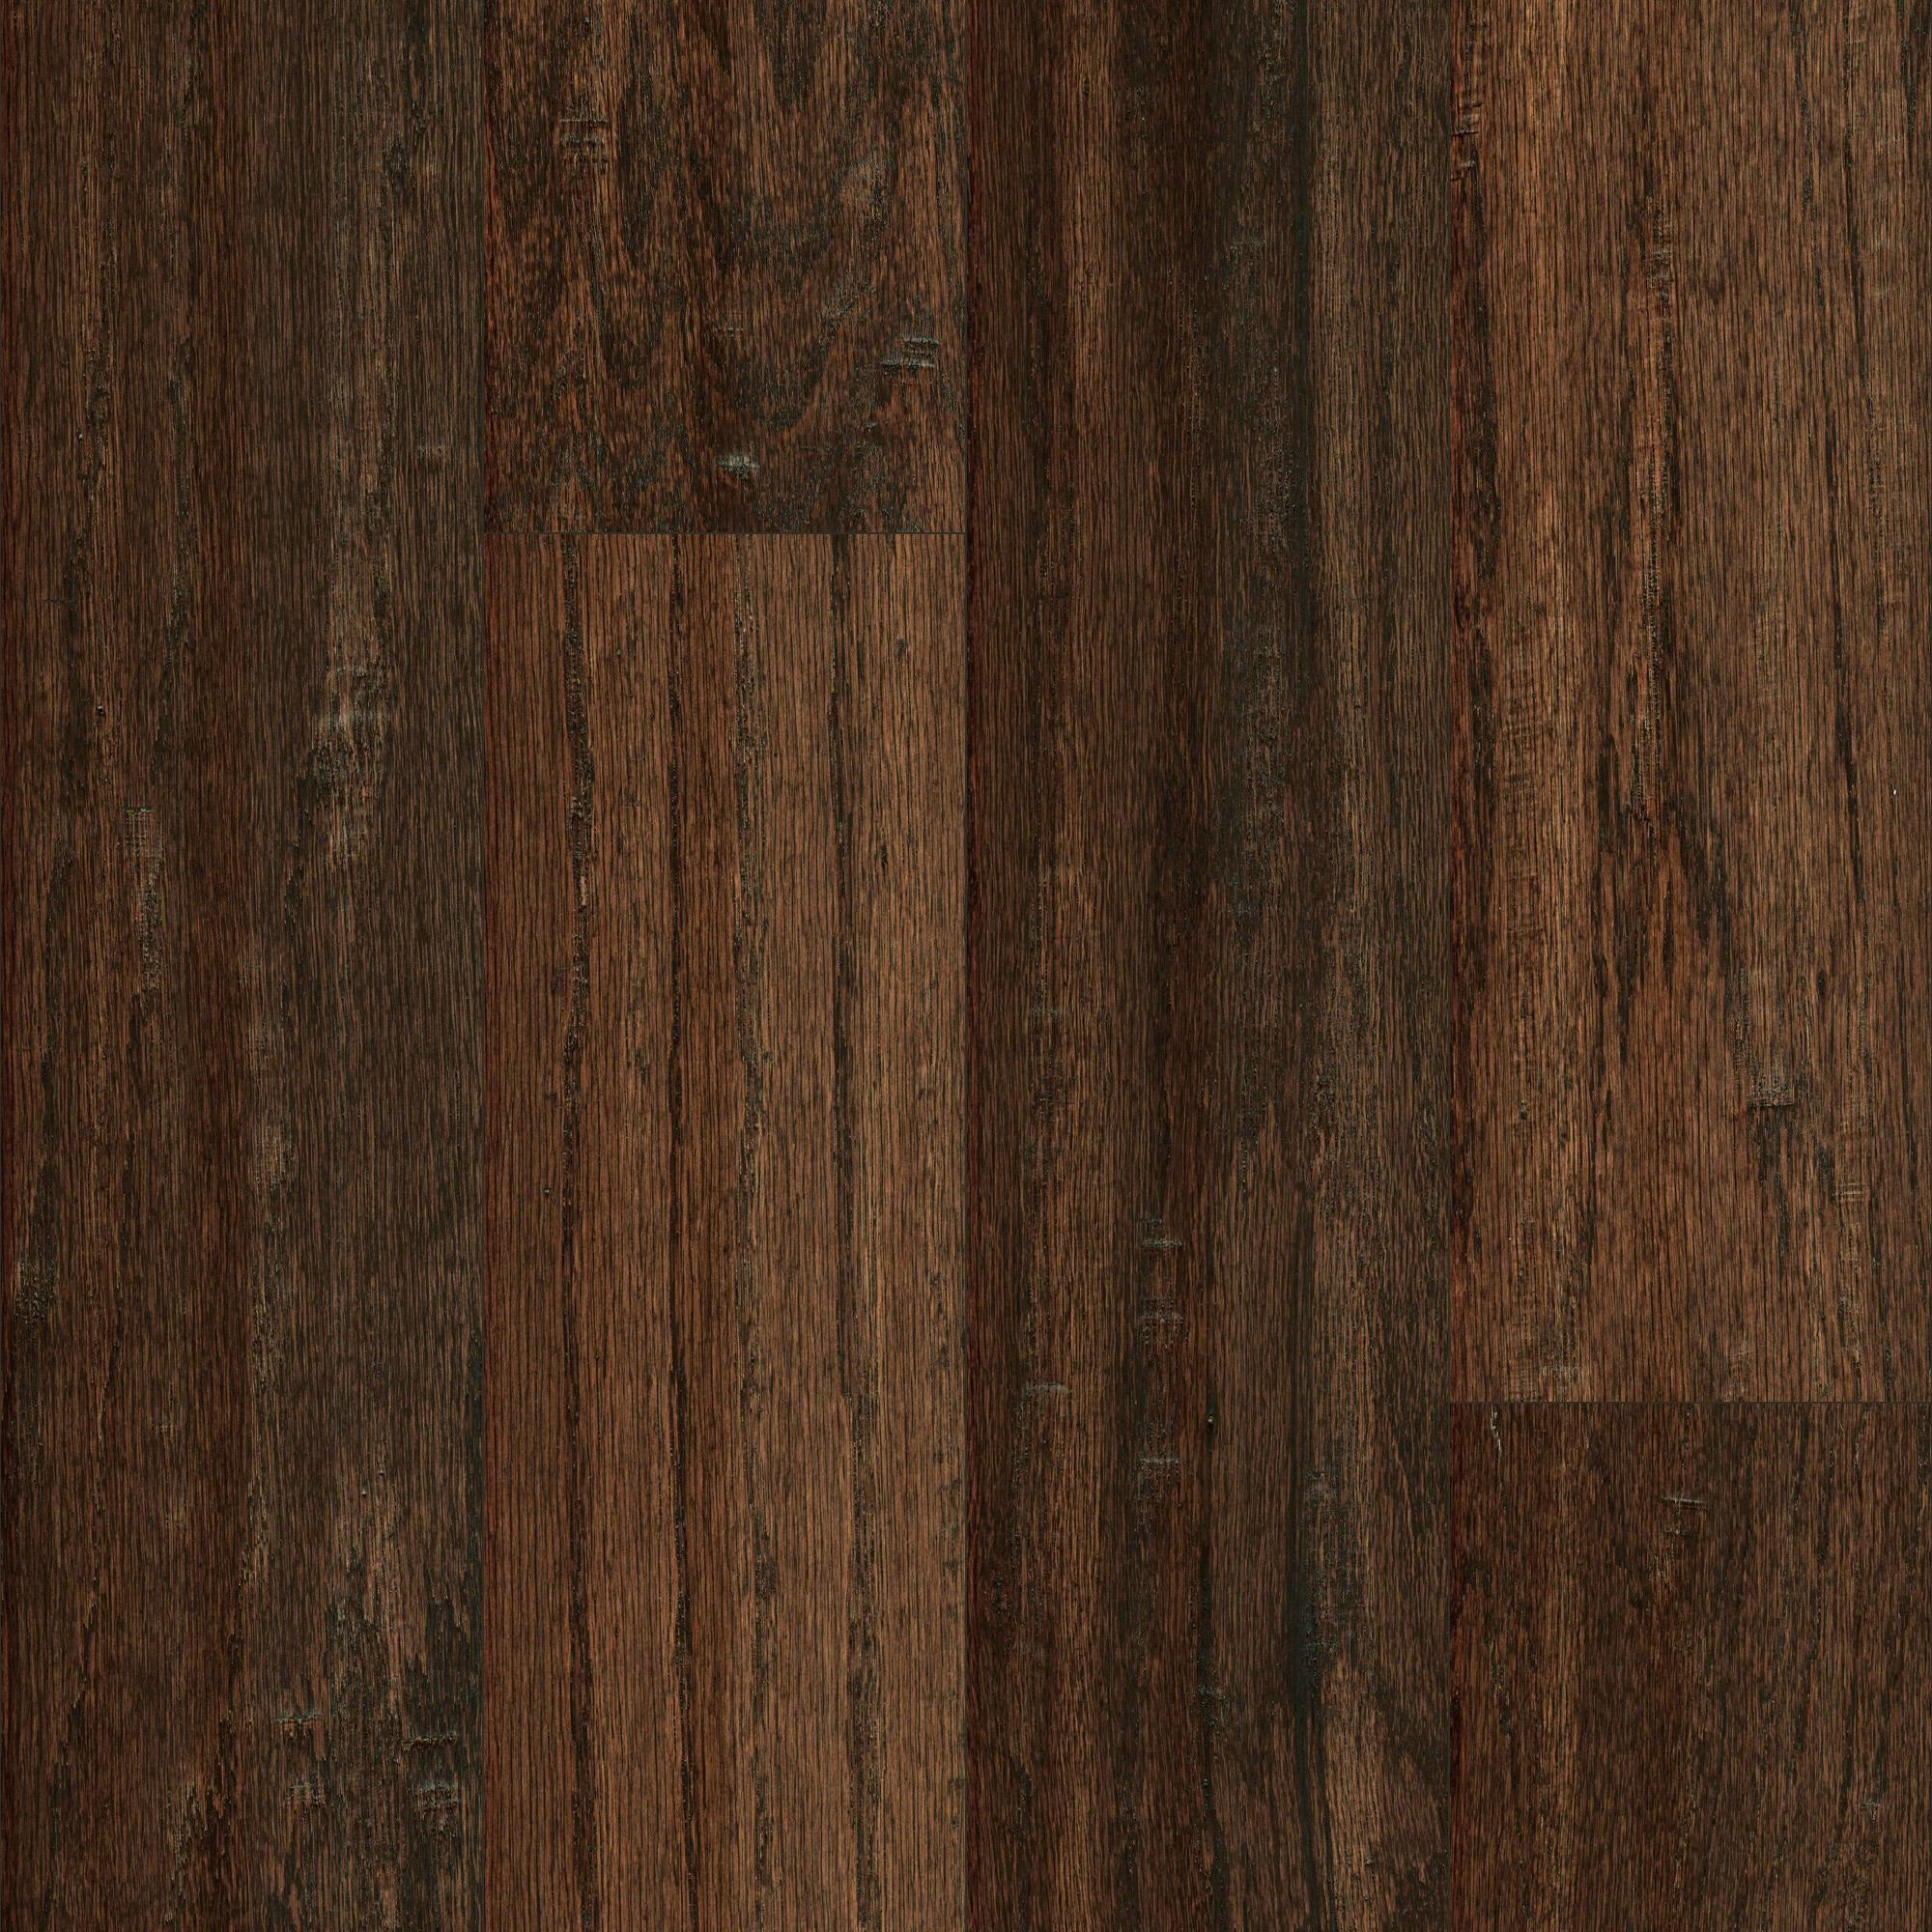 25 Famous How Much Does Oak Hardwood Flooring Cost 2024 free download how much does oak hardwood flooring cost of mullican lincolnshire sculpted red oak laredo 5 engineered hardwood within mullican lincolnshire sculpted red oak laredo 5 engineered hardwood flo